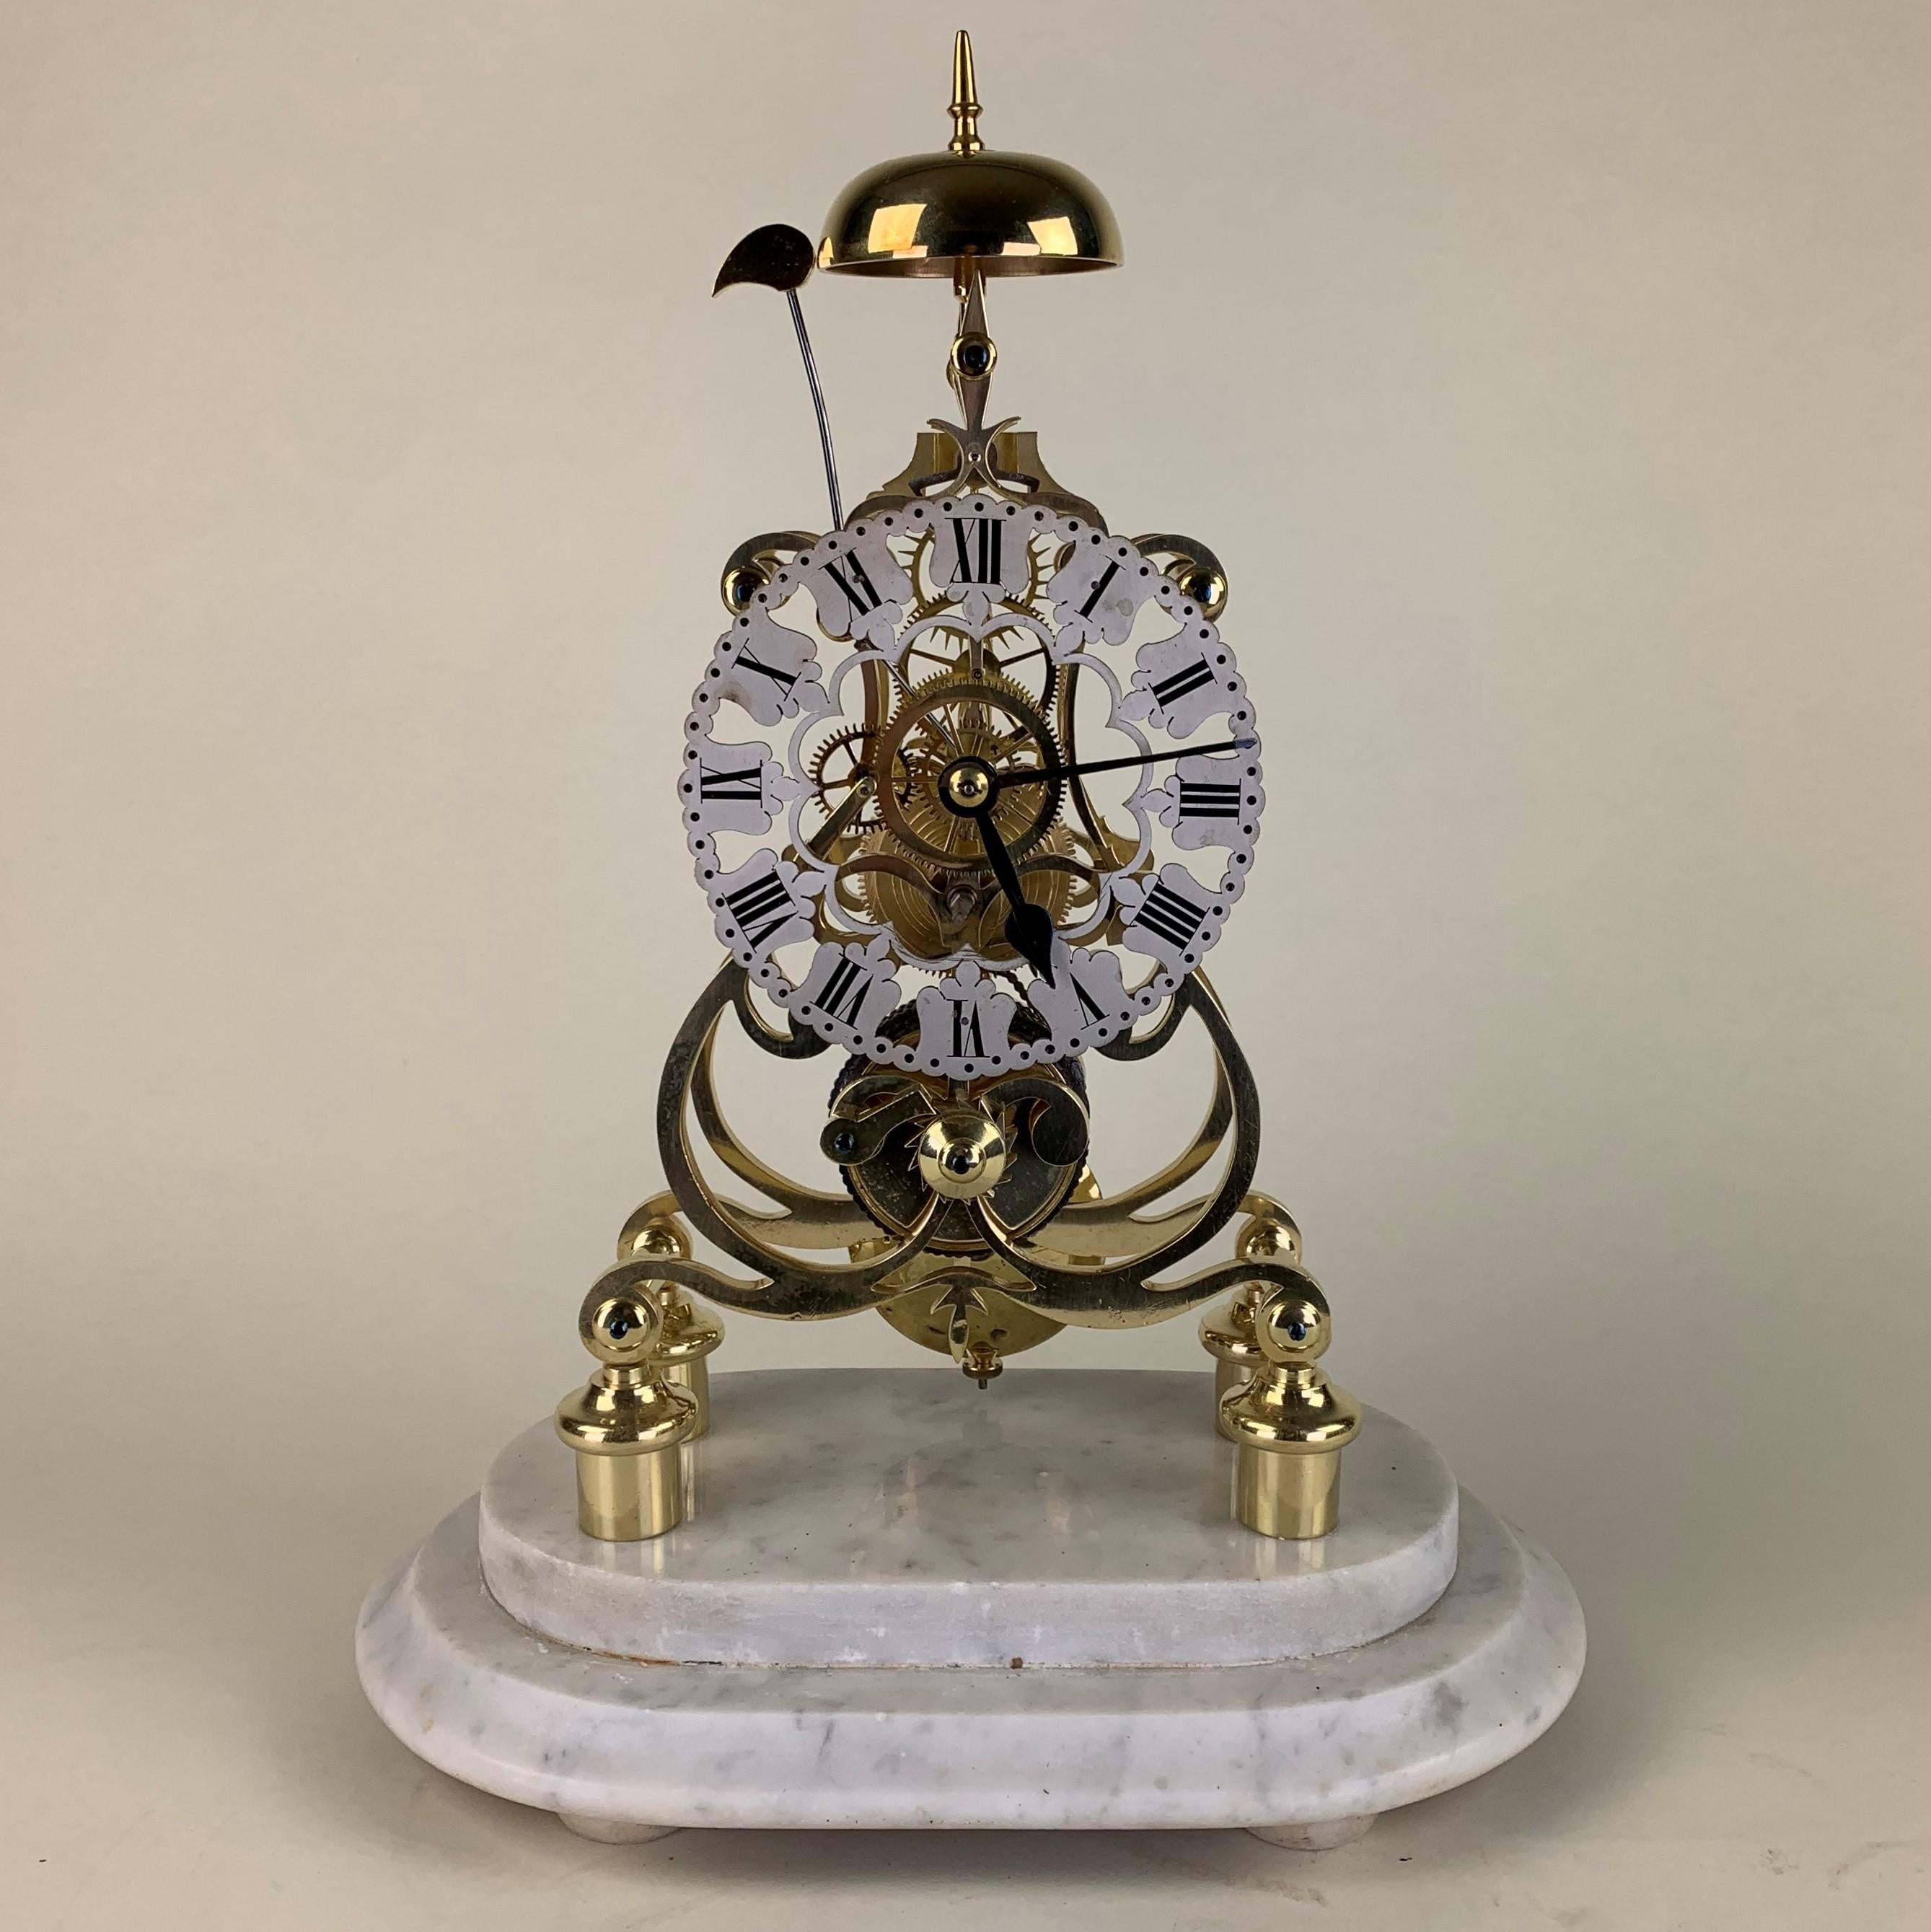 A fine quality Art Nouveau, steeple shaped skeleton clock raised on four pillars with a chain driven movement surmounted by a bell chiming the hours. Pierced silvered chapter ring with Roman numerals. Housed under its original glass dome and white